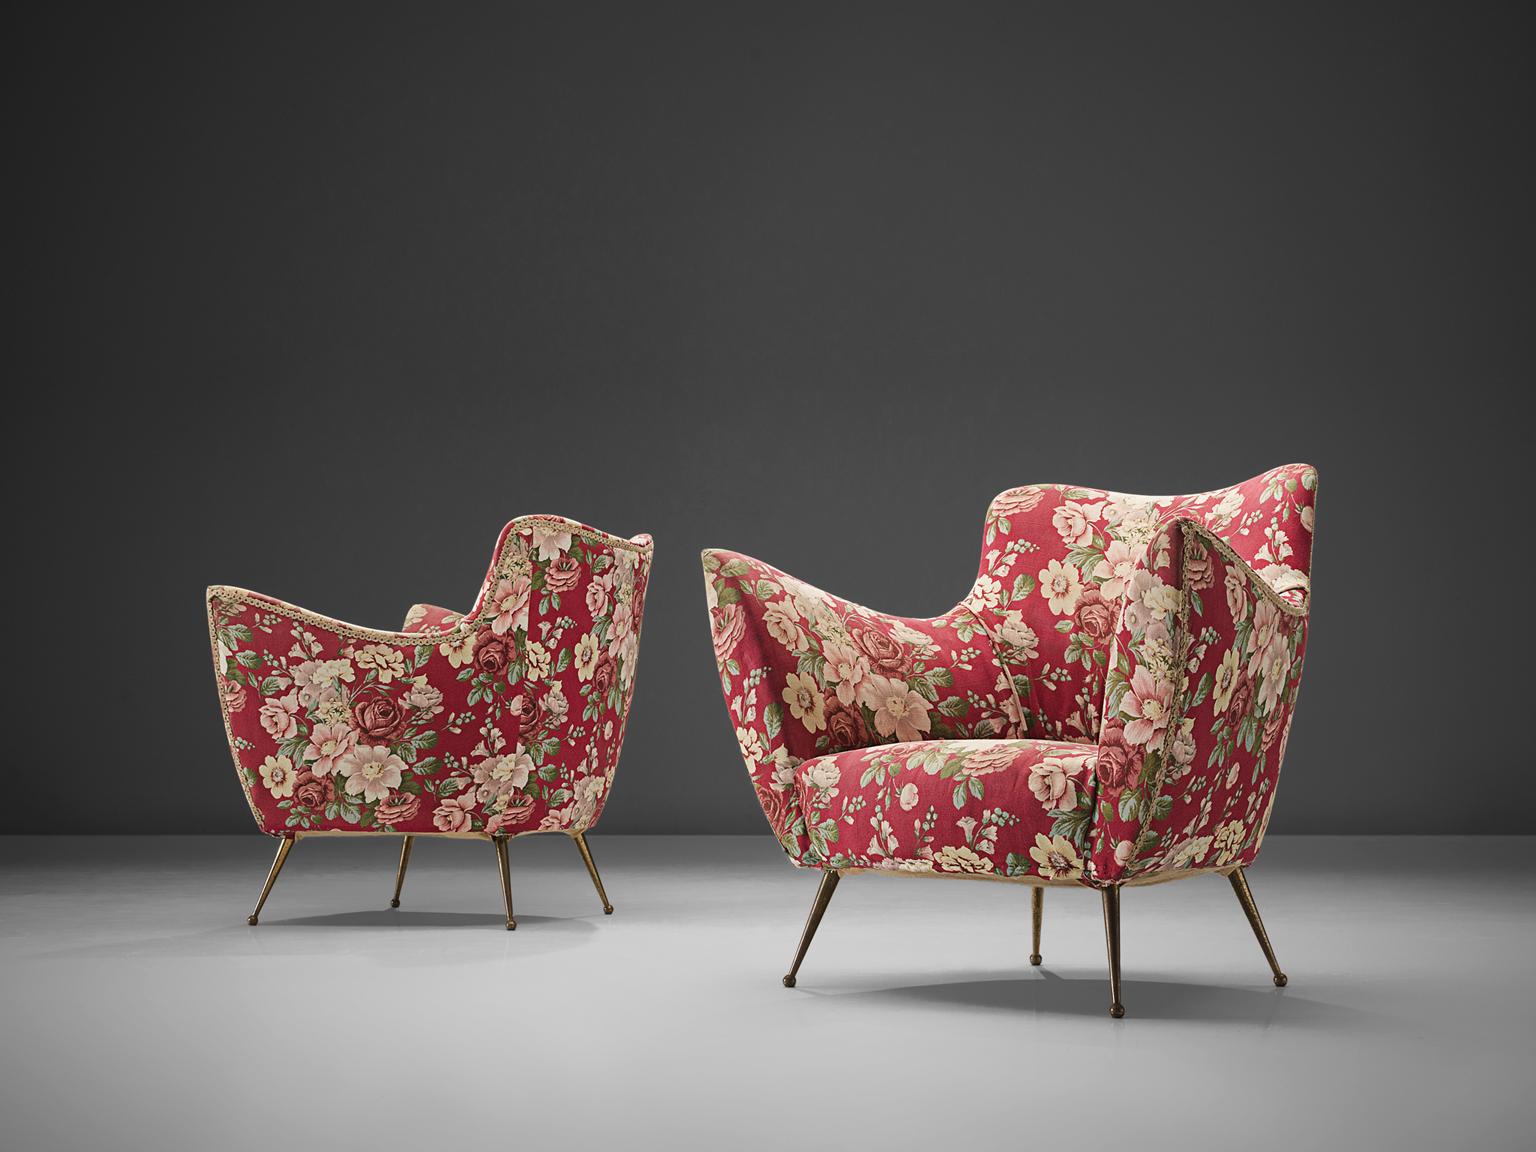 ISA Bergamo, lounge chairs in original floral pink and red fabric, brass, Italy, 1950s. 

These chairs are iconic examples of Italian design from the 1950s. Organic and sculptural, these easy chairs are anything but minimalistic. Equipped with the